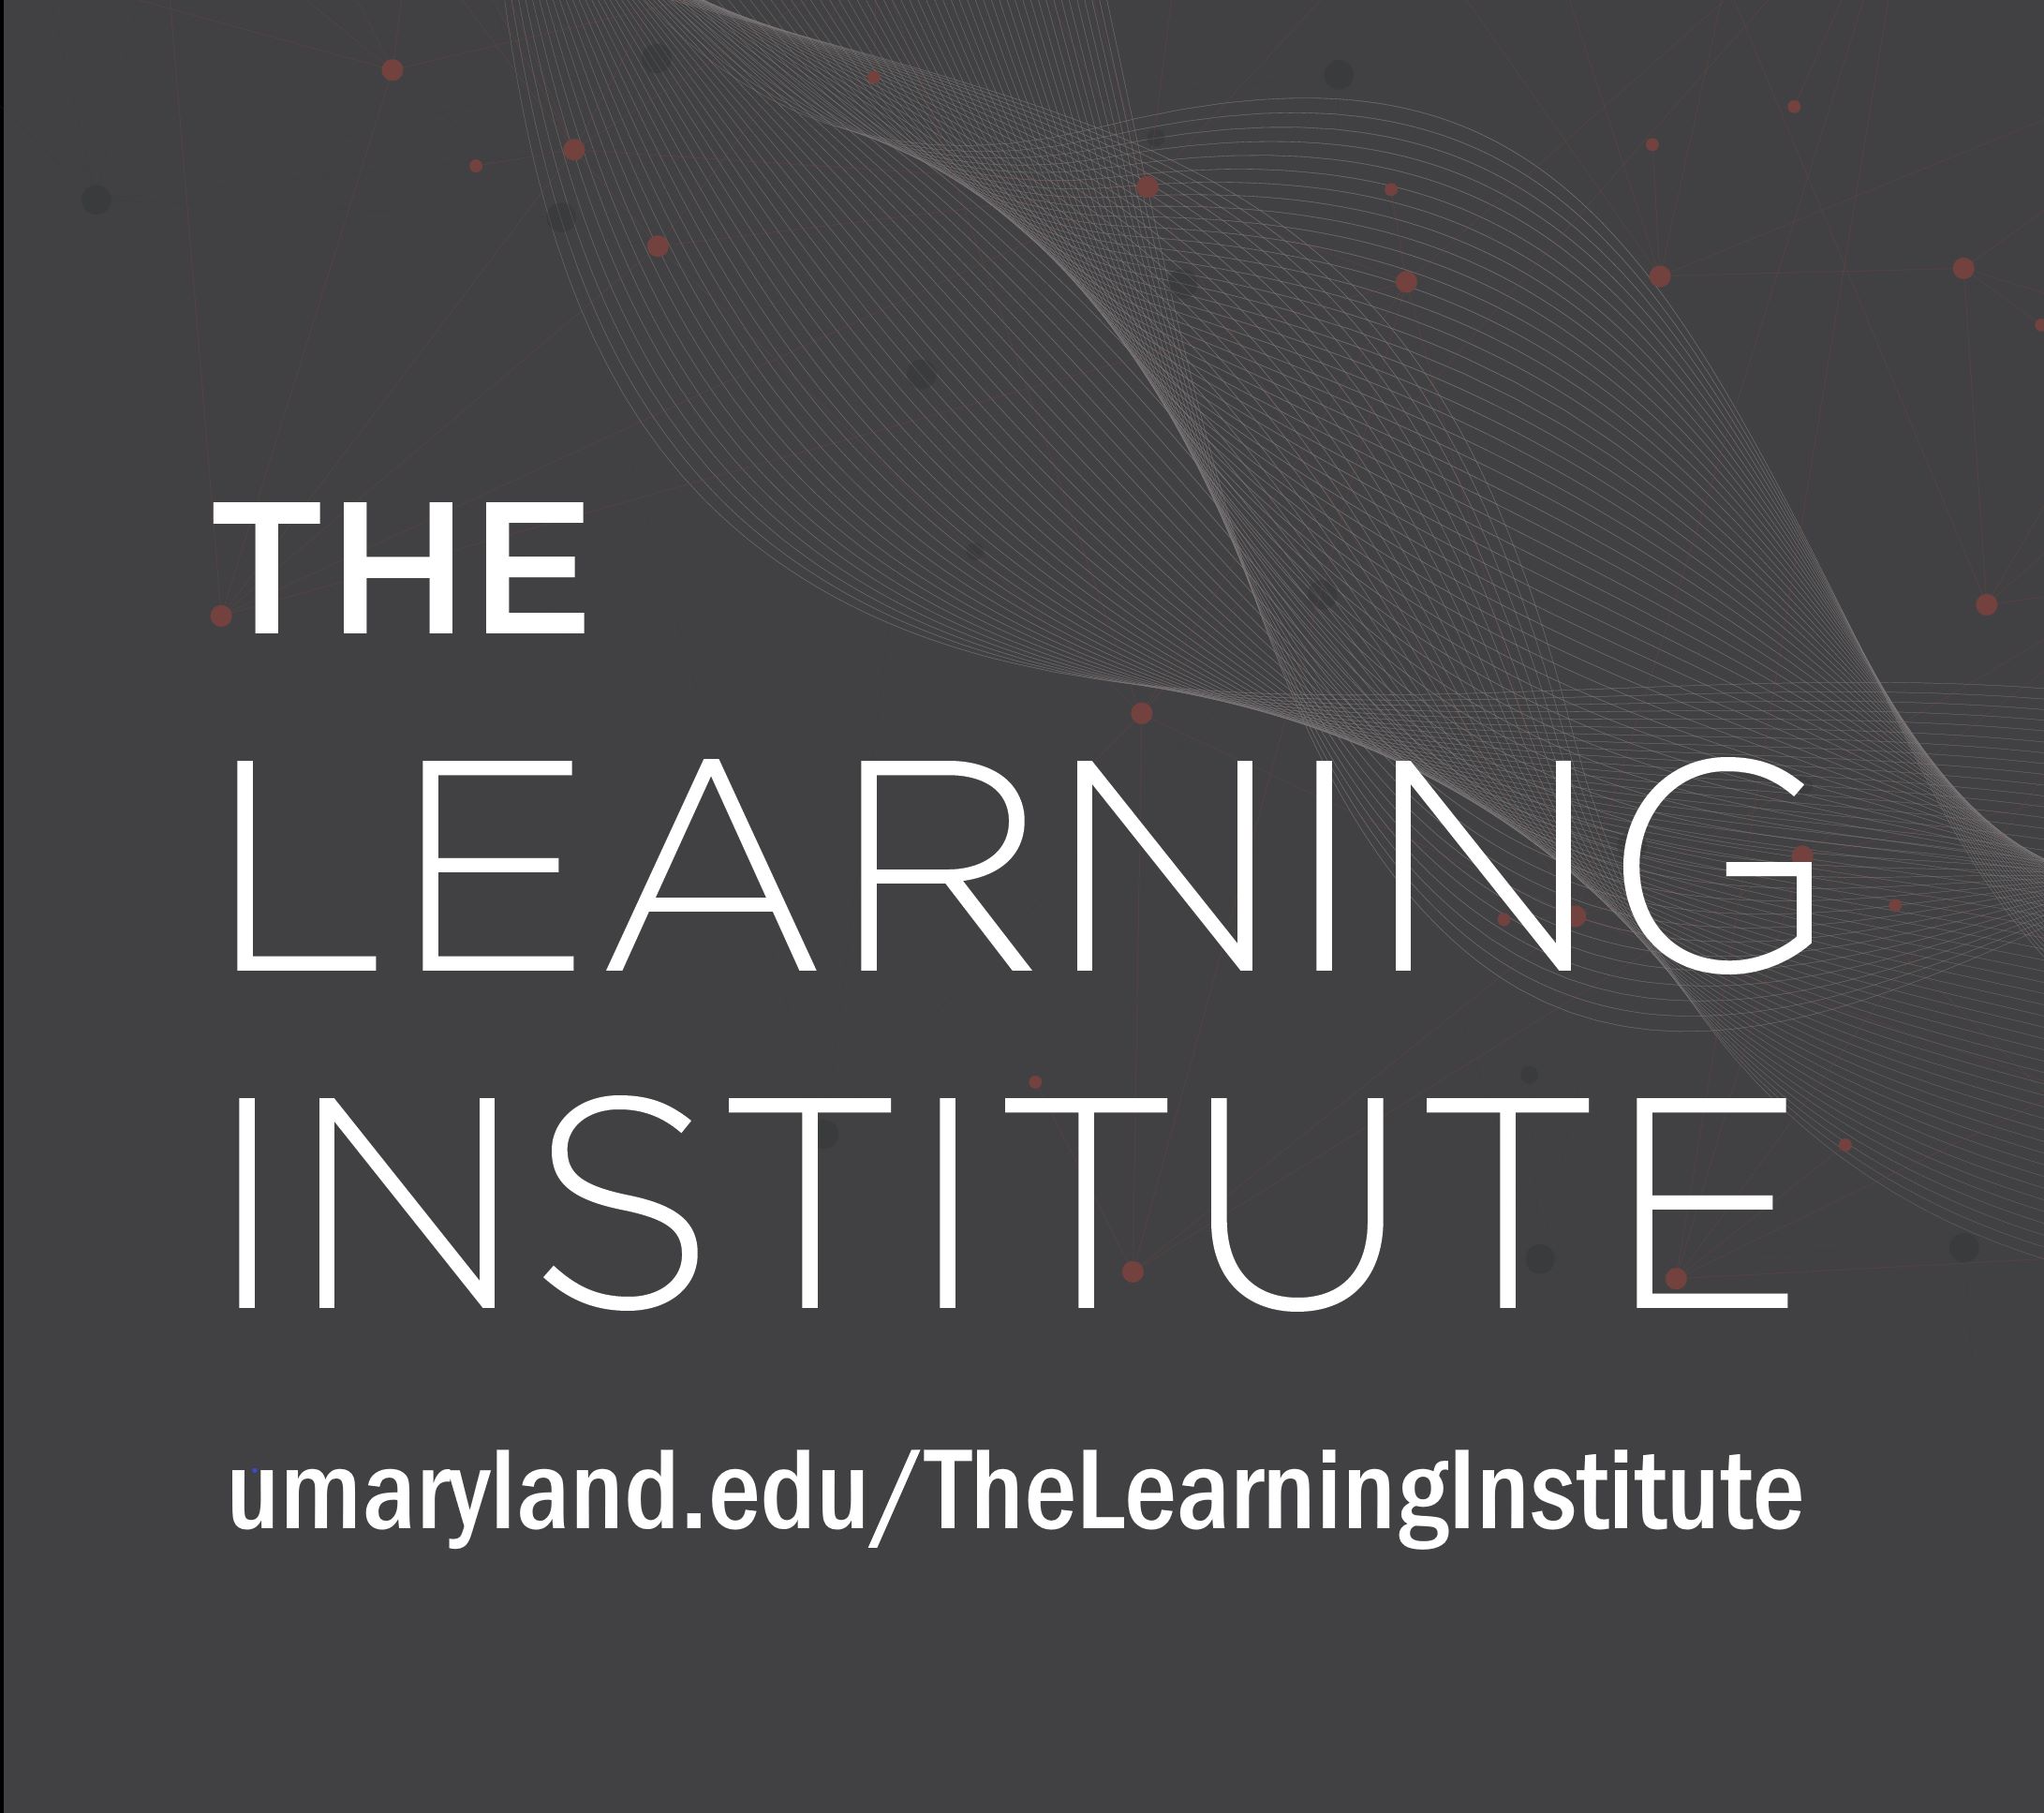 The Learning Institute logo